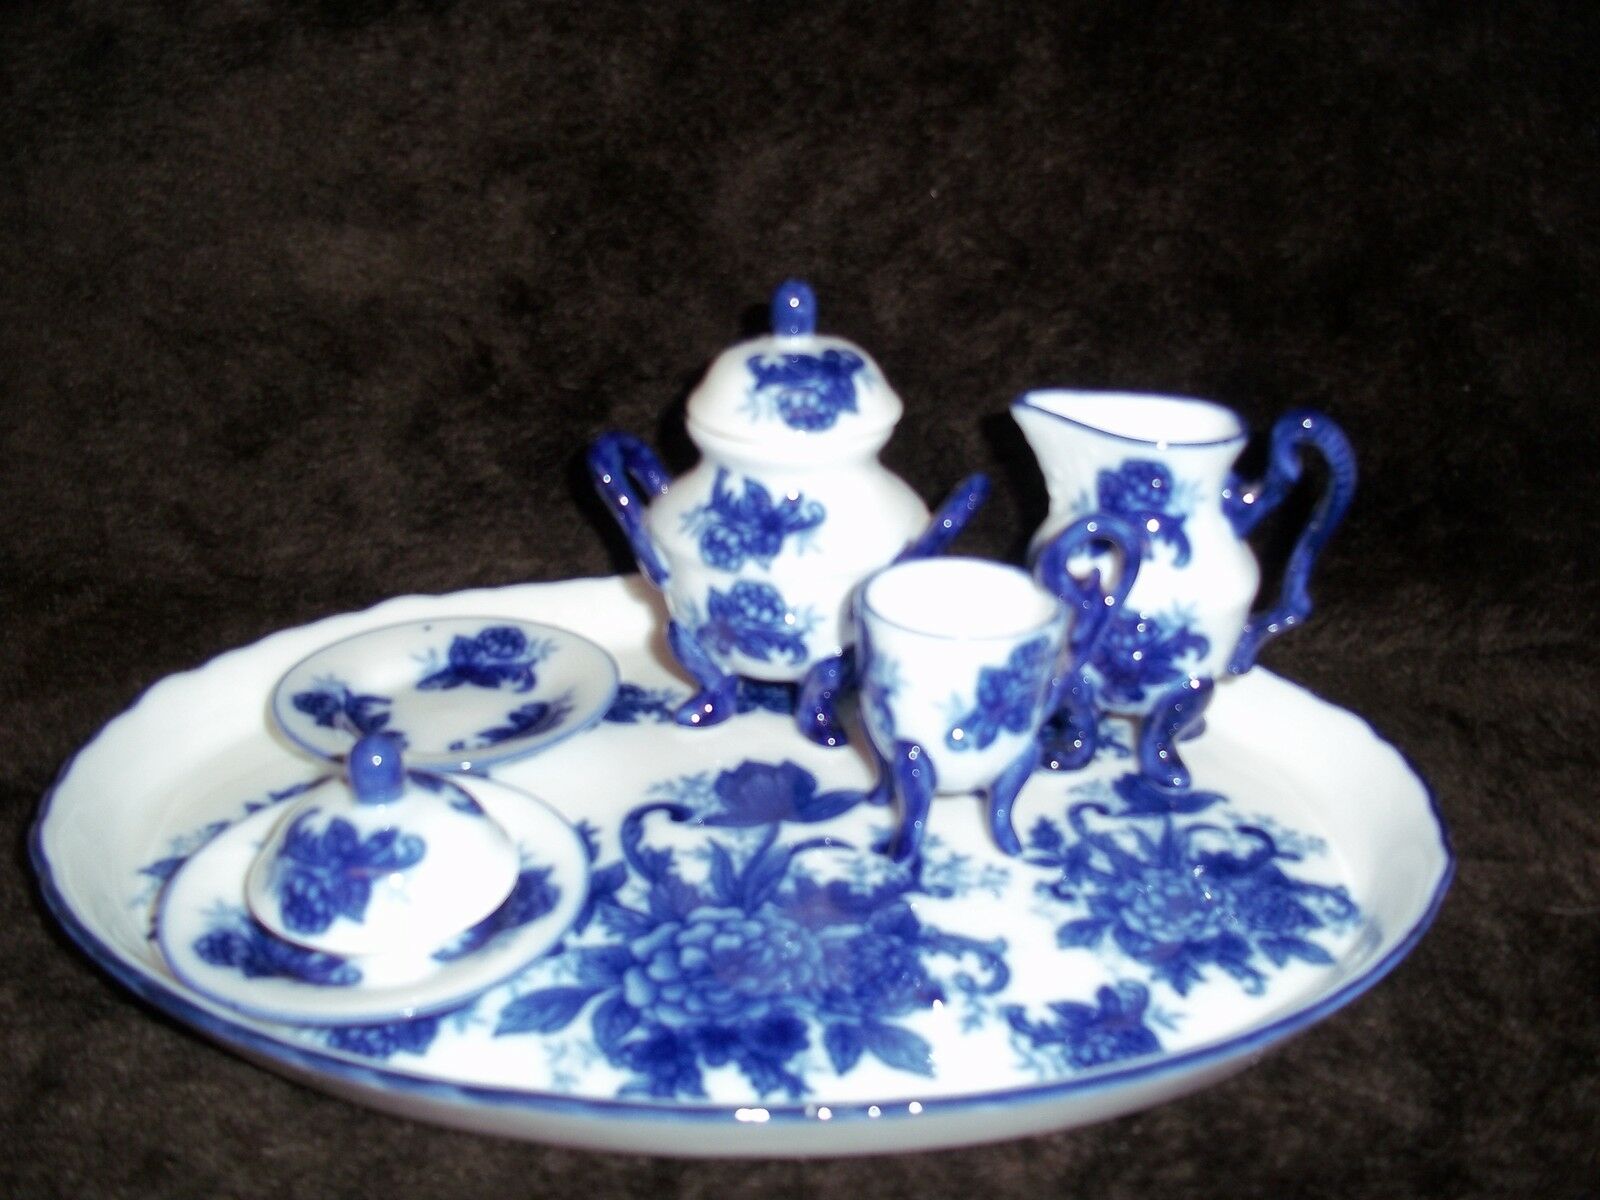 Childs Tea Set - Blue and White